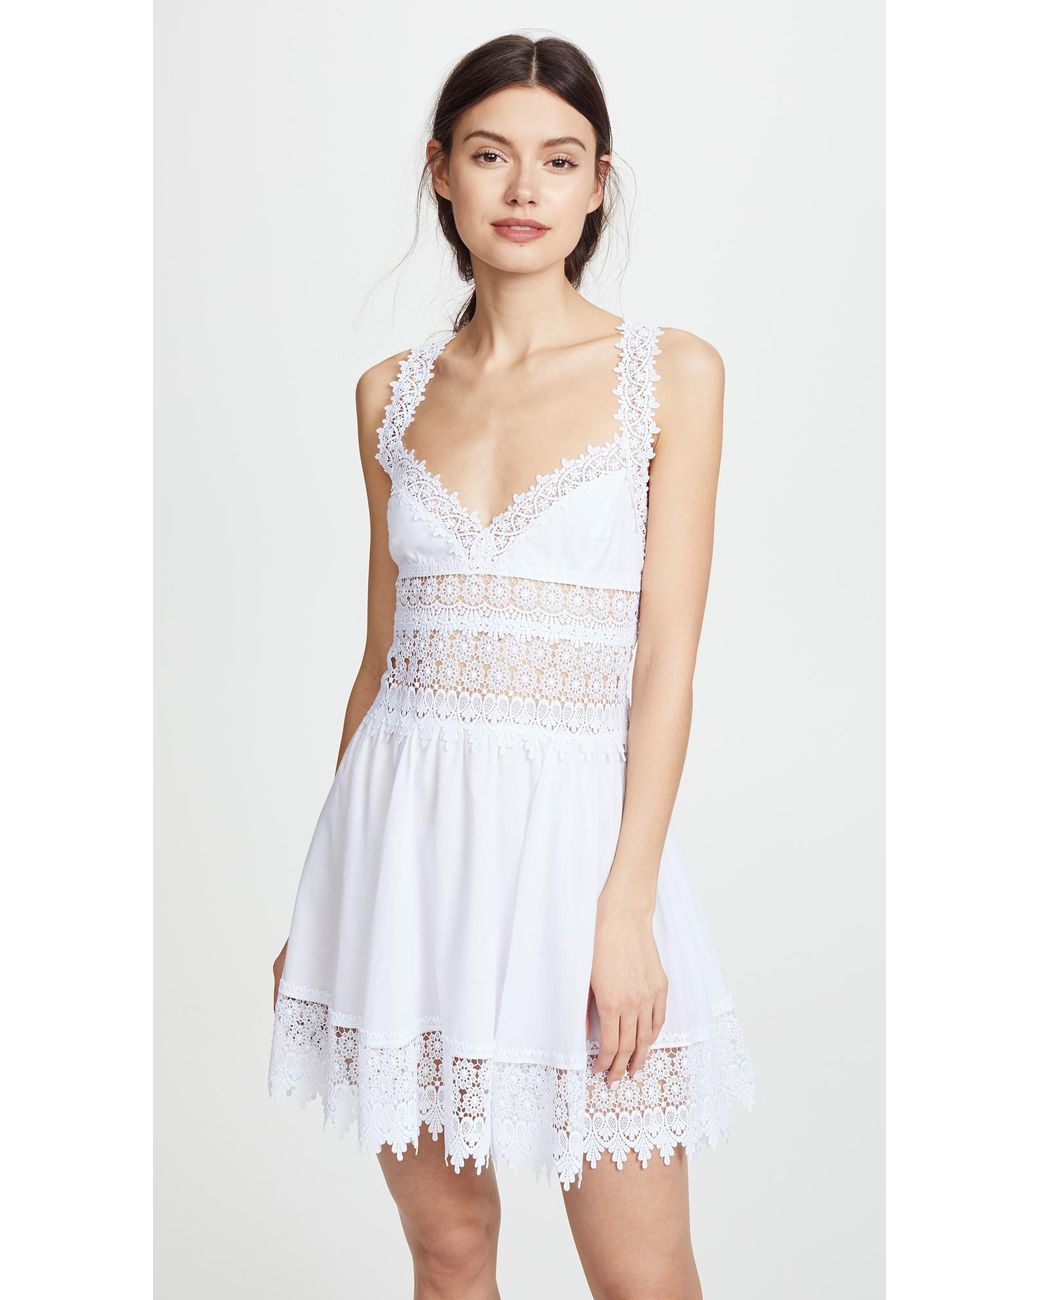 Charo Ruiz Lace Marilyn Dress in White - Save 4% - Lyst